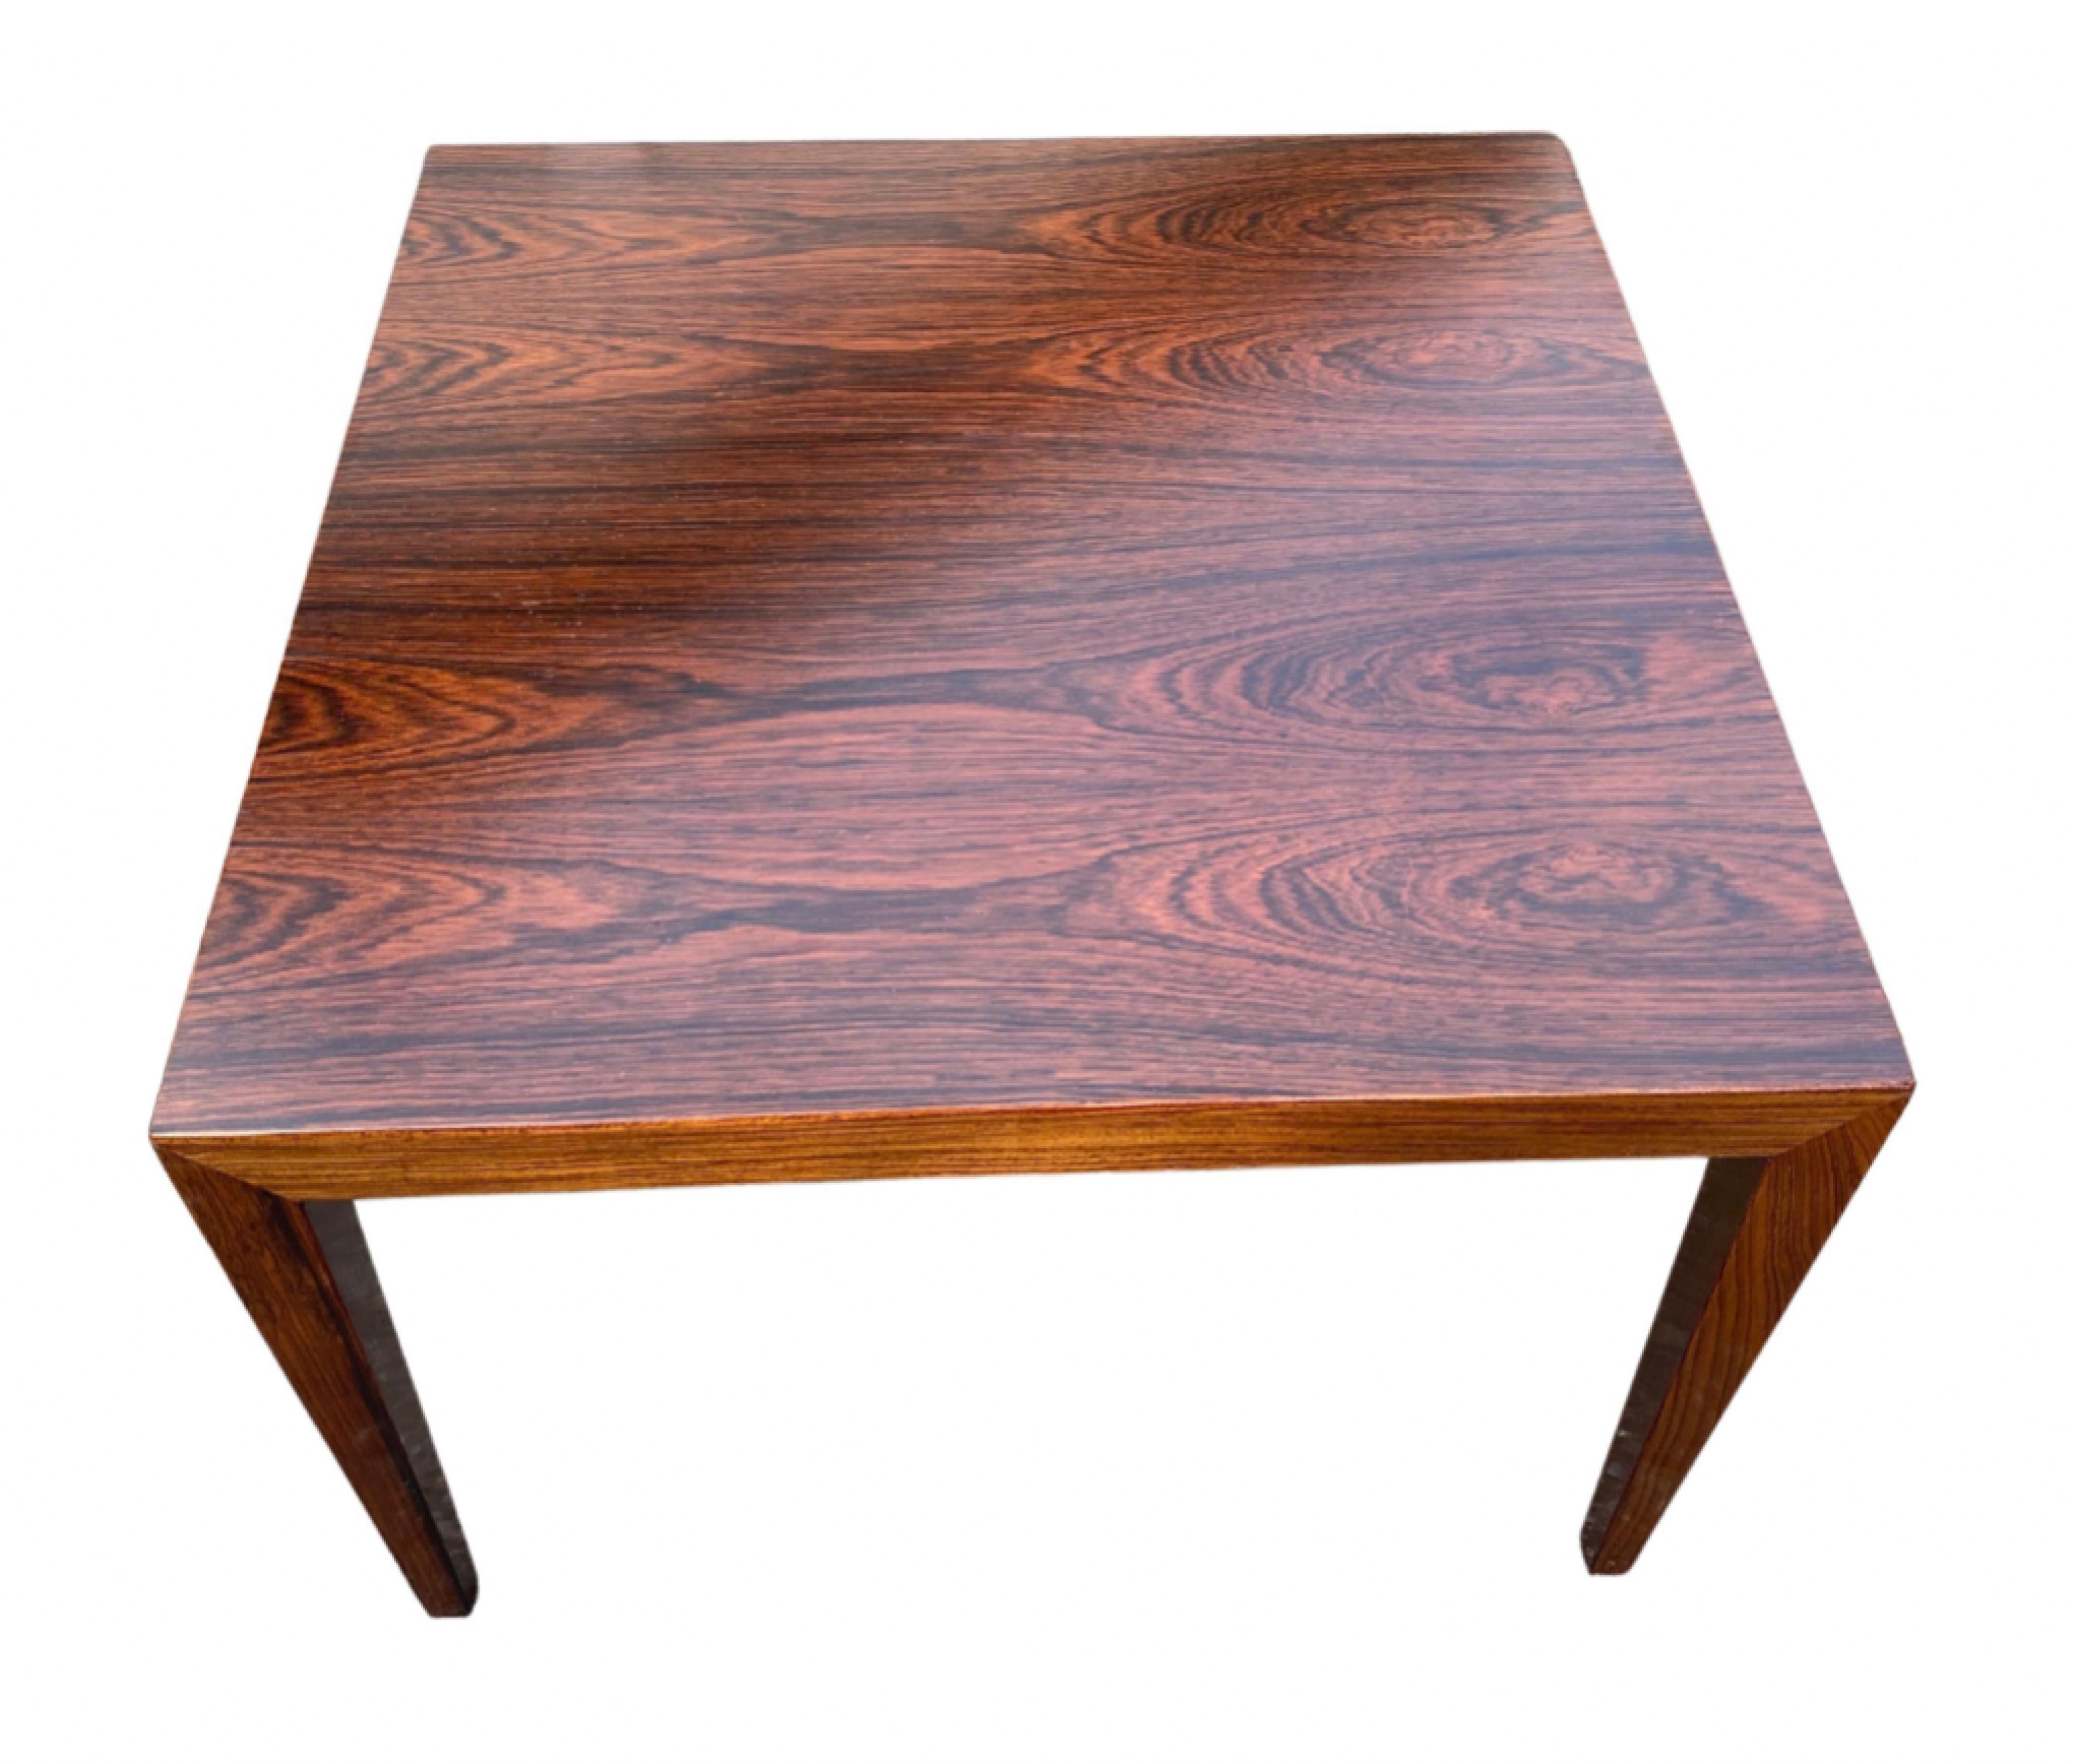 Coffee table in rosewood by legendary Danish designer Severin Hansen.

Especially the corner joints made these coffee tables famous and coveted. 

Produced by Haslev Møbelfabrikk in the 1960s.

Gently and expertly refinished to highest